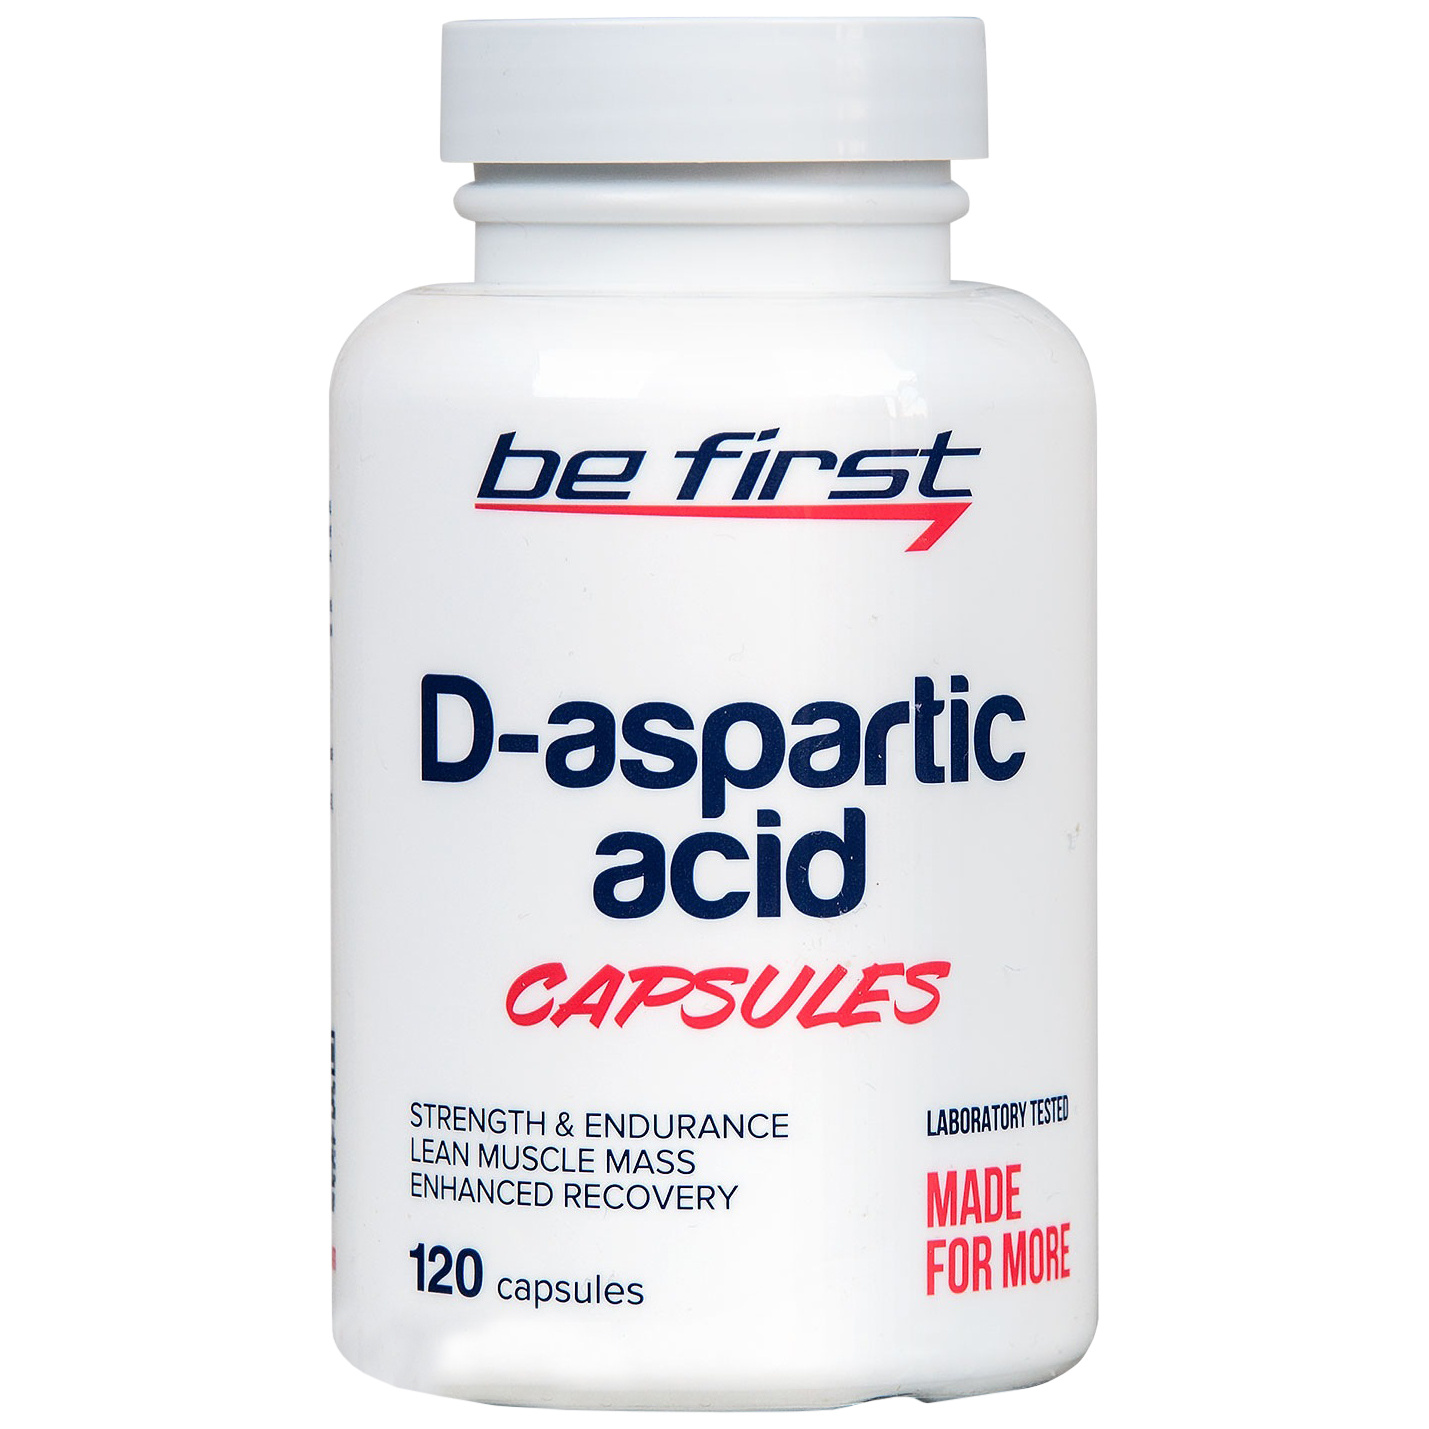 Extract first. Be first Guarana 60 Capsules. Daa be first 120 капсул. Be first d-Aspartic acid. D аспарагиновая кислота.